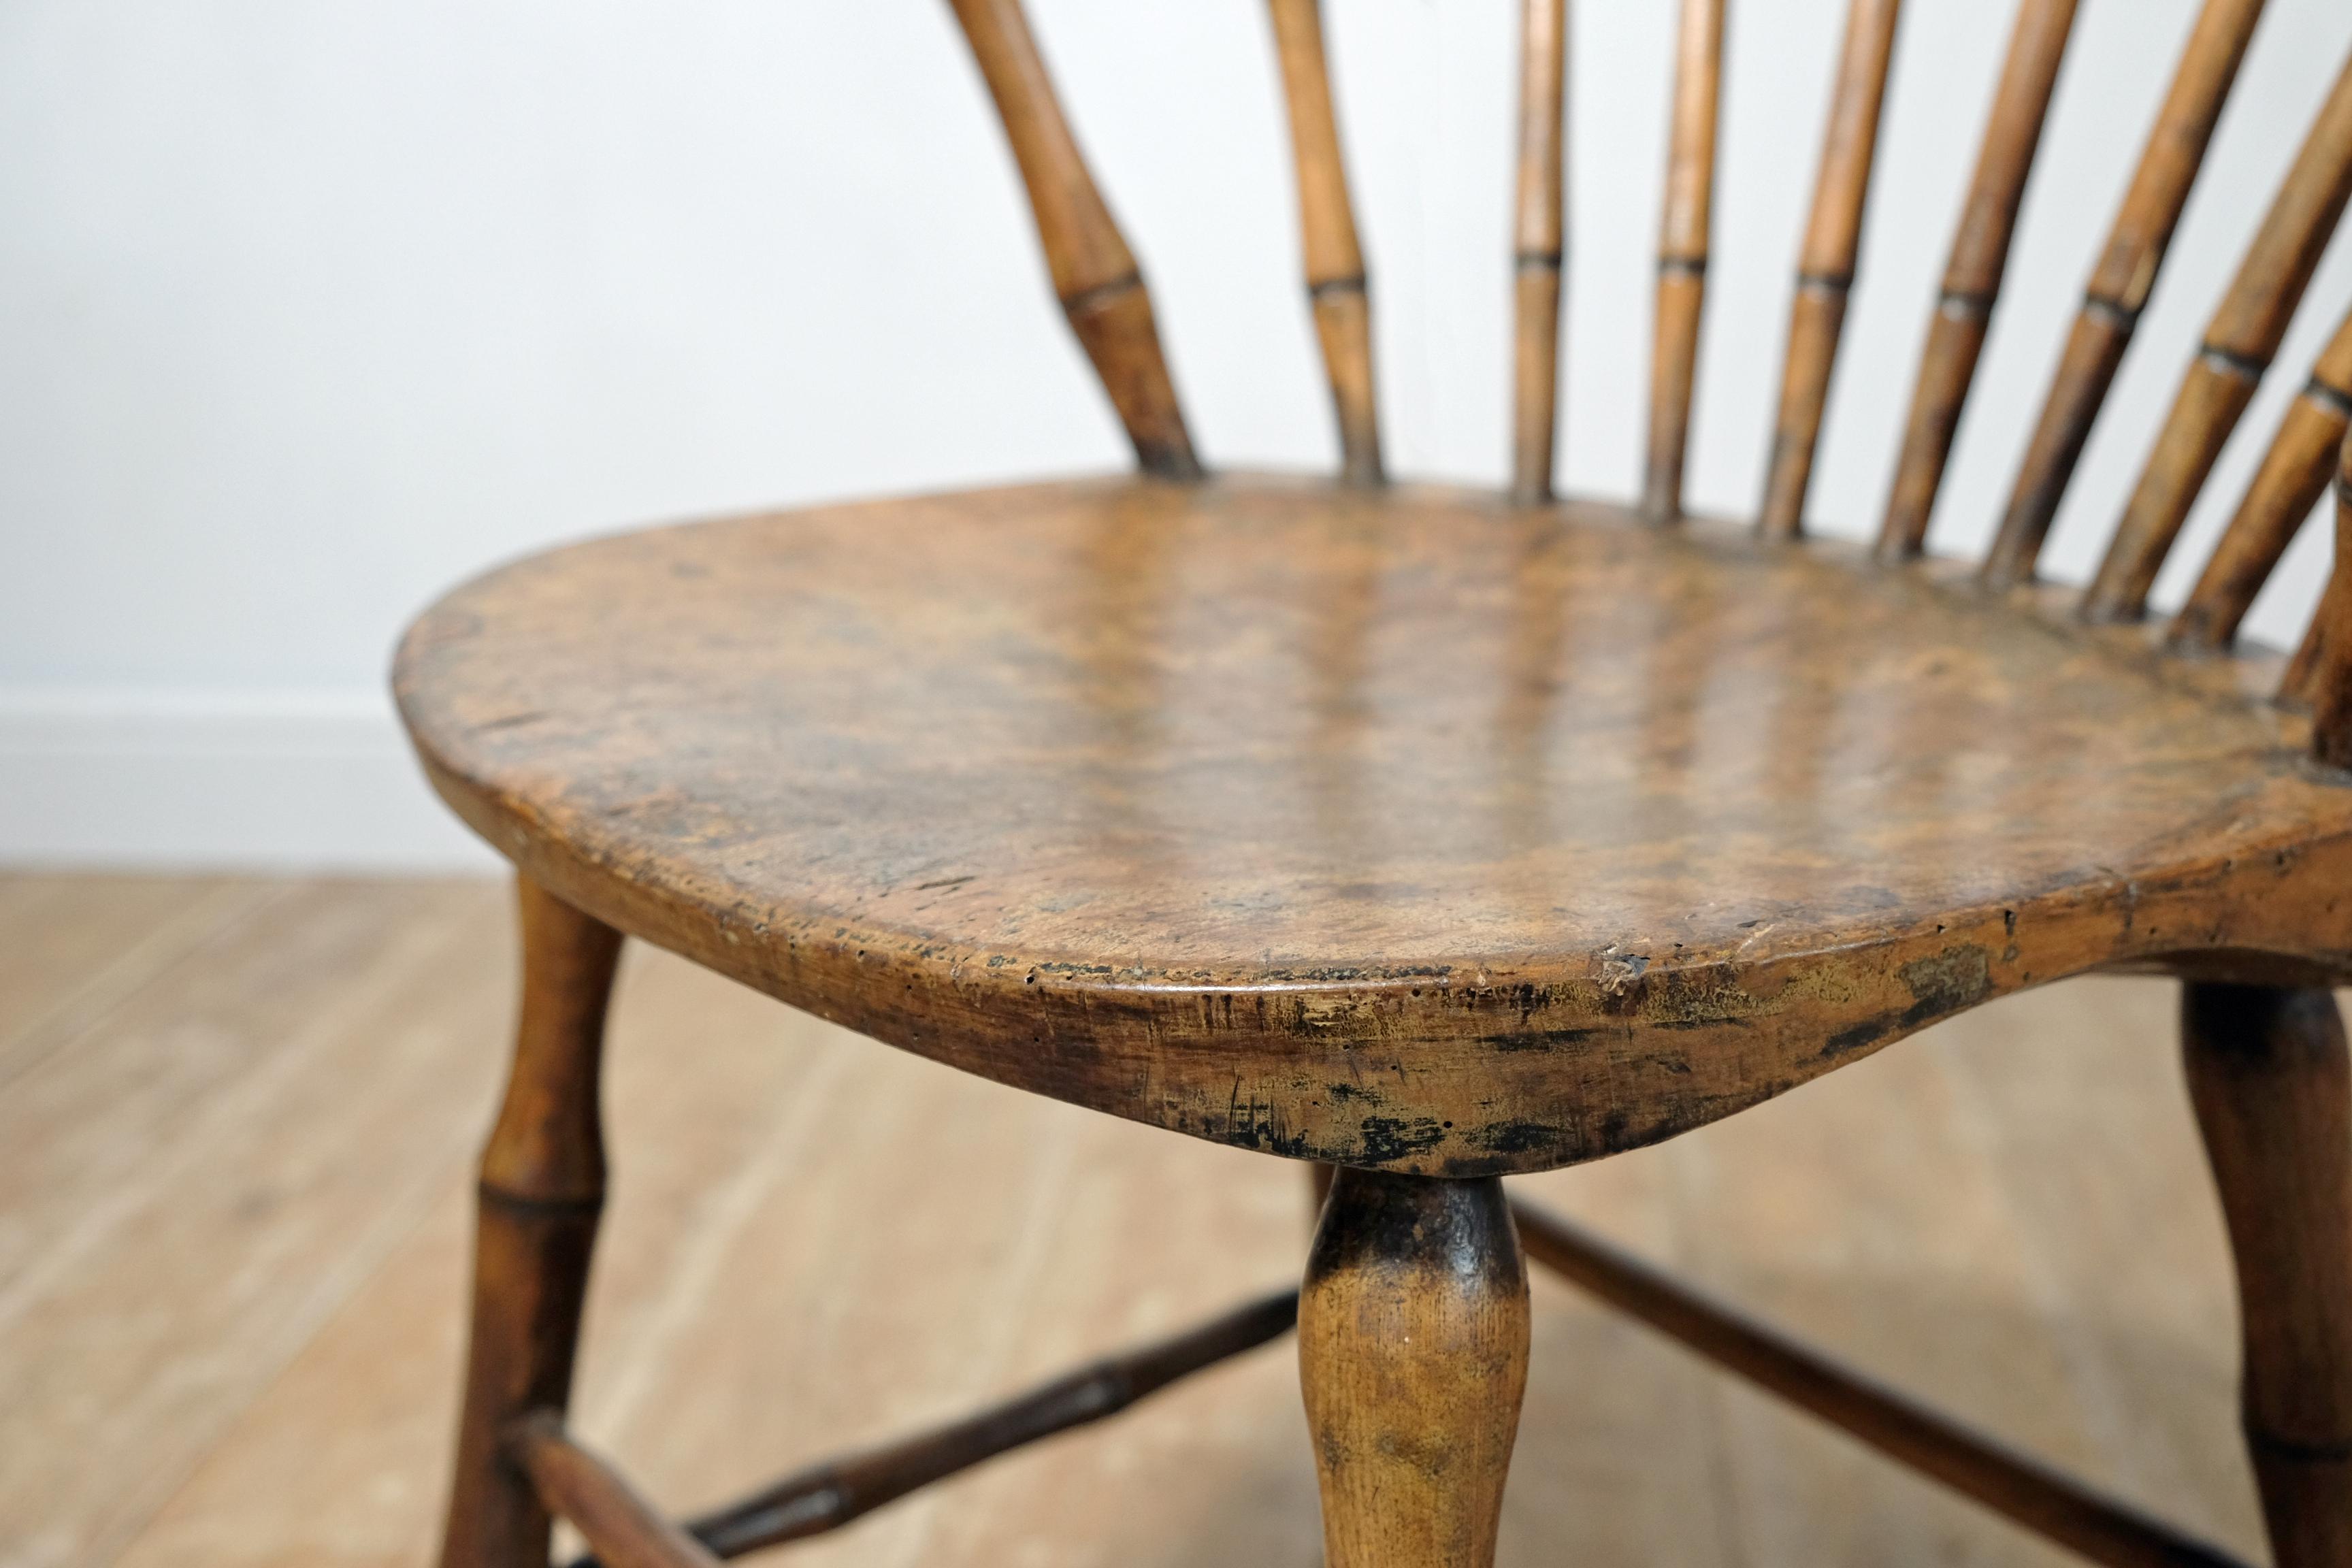 19th Century Continuous Arm Yealmpton Windsor Chair, English, Armchair, Original Paint, 1820s